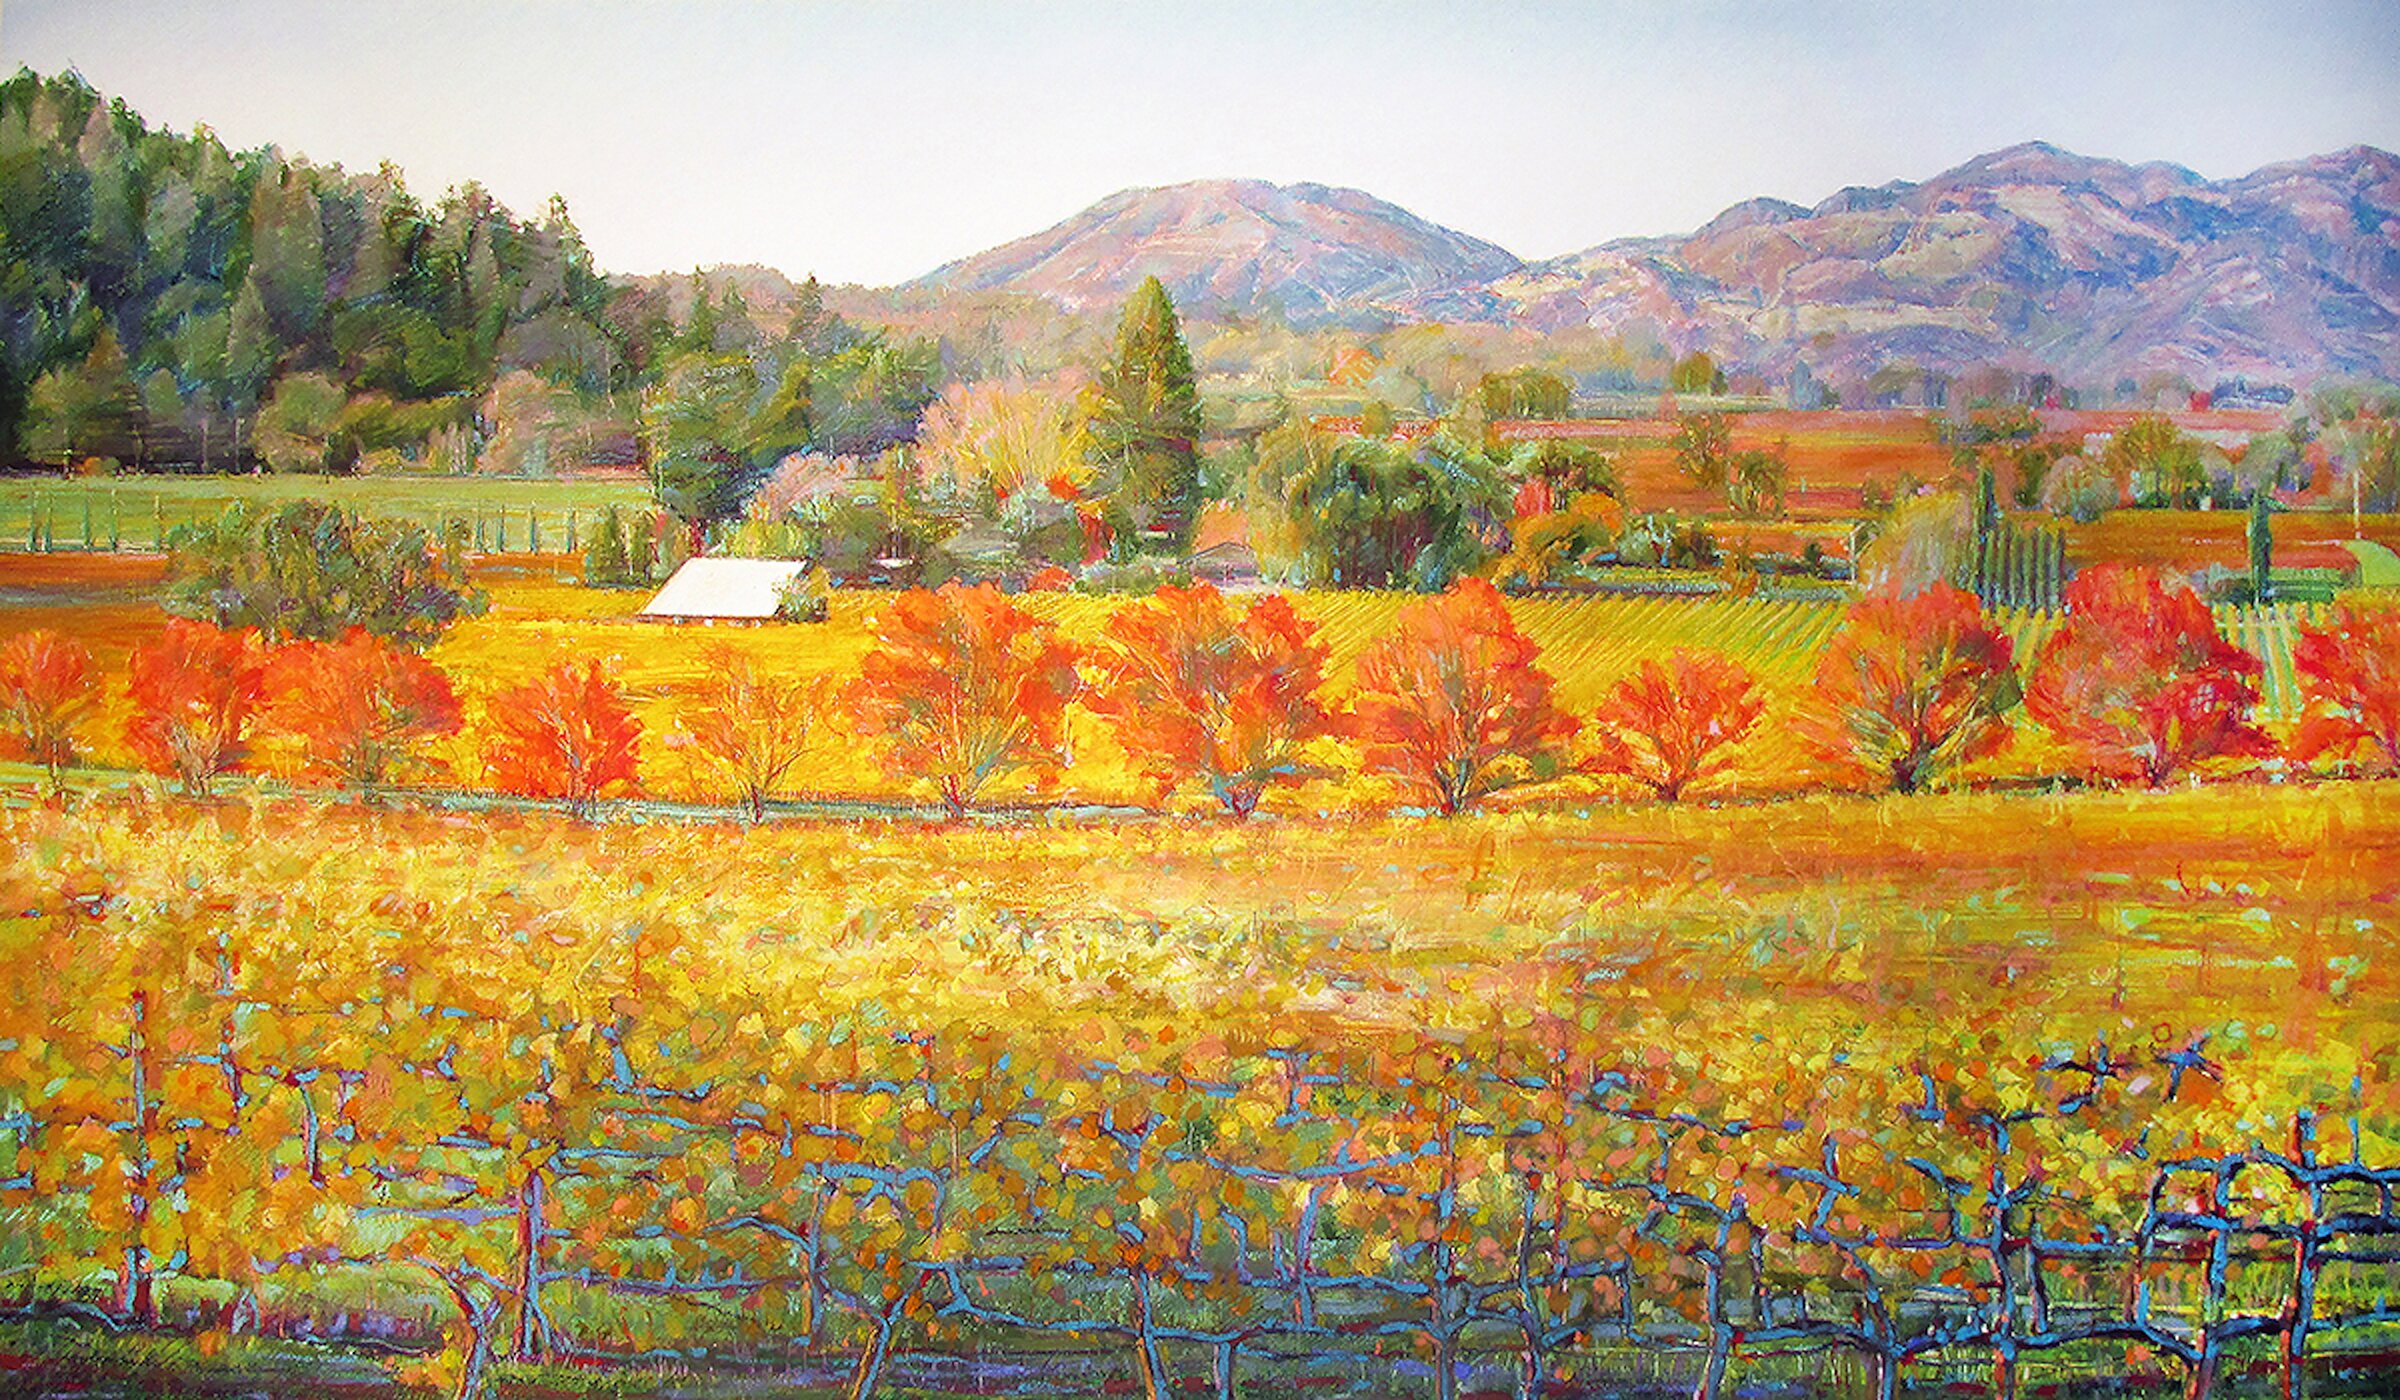 Steven Gordon; UpValley, 2022, Original Giclee Reproduction, 36 x 21 inches. Artwork description: 241 MyUpValleybrings the beauty of Napa Valley during our Harvest on a full Fall day.  The vineyards and the trees along the roads are changing color and the largest iconic mountain in The Valley, Mount St.  Helena is seen towering in the distance.  The original oil painting was ...